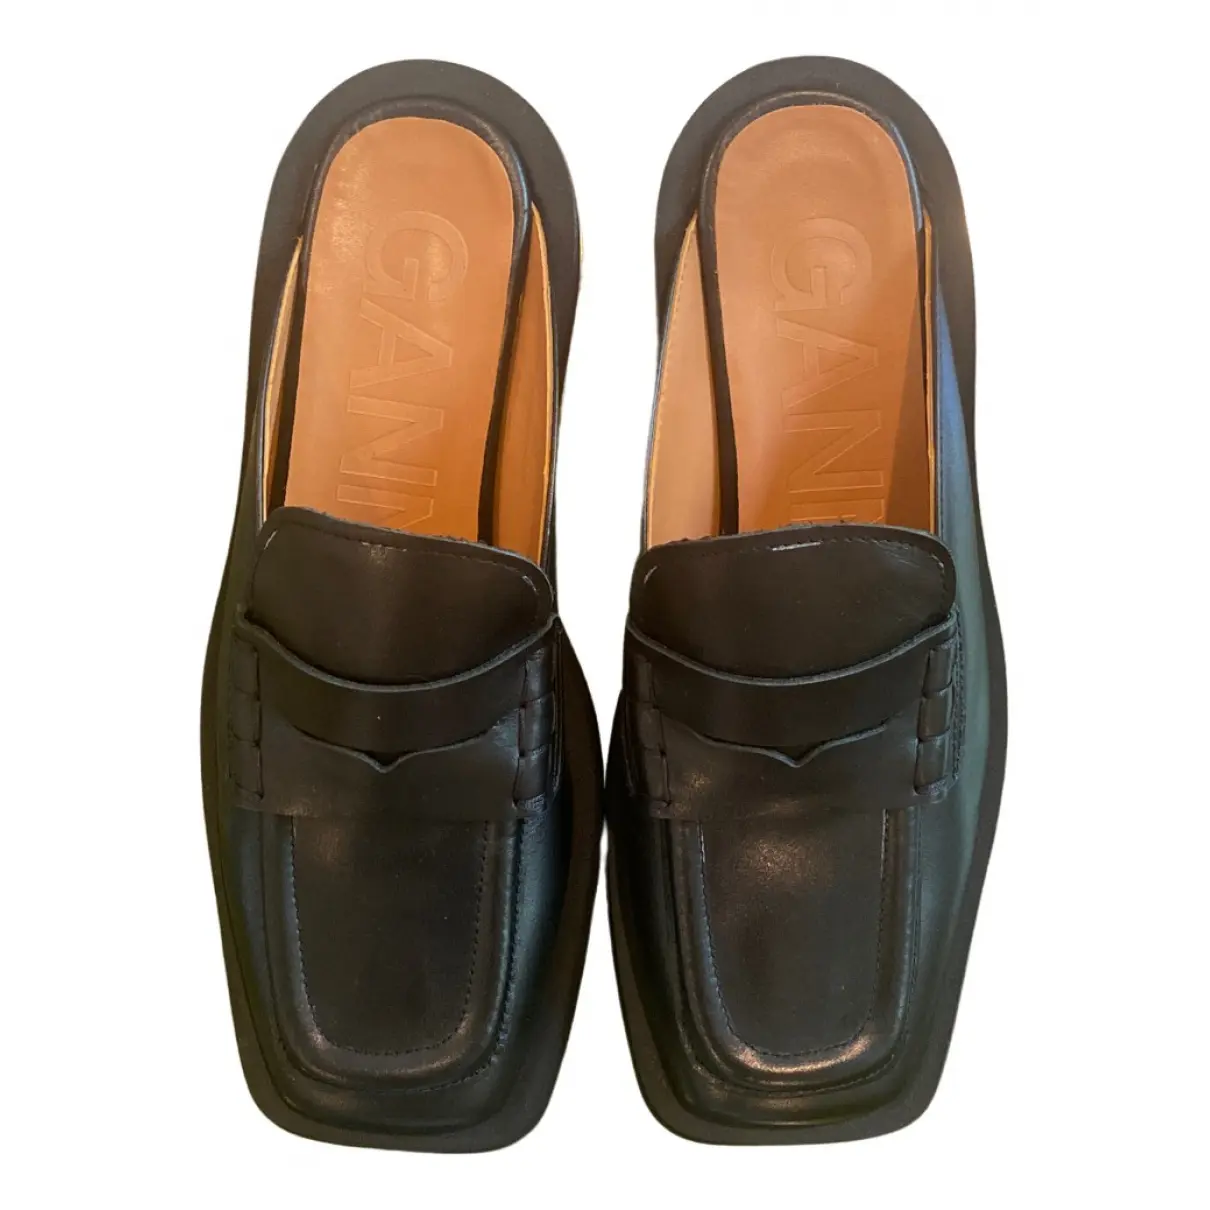 Fall Winter 2019 leather mules & clogs